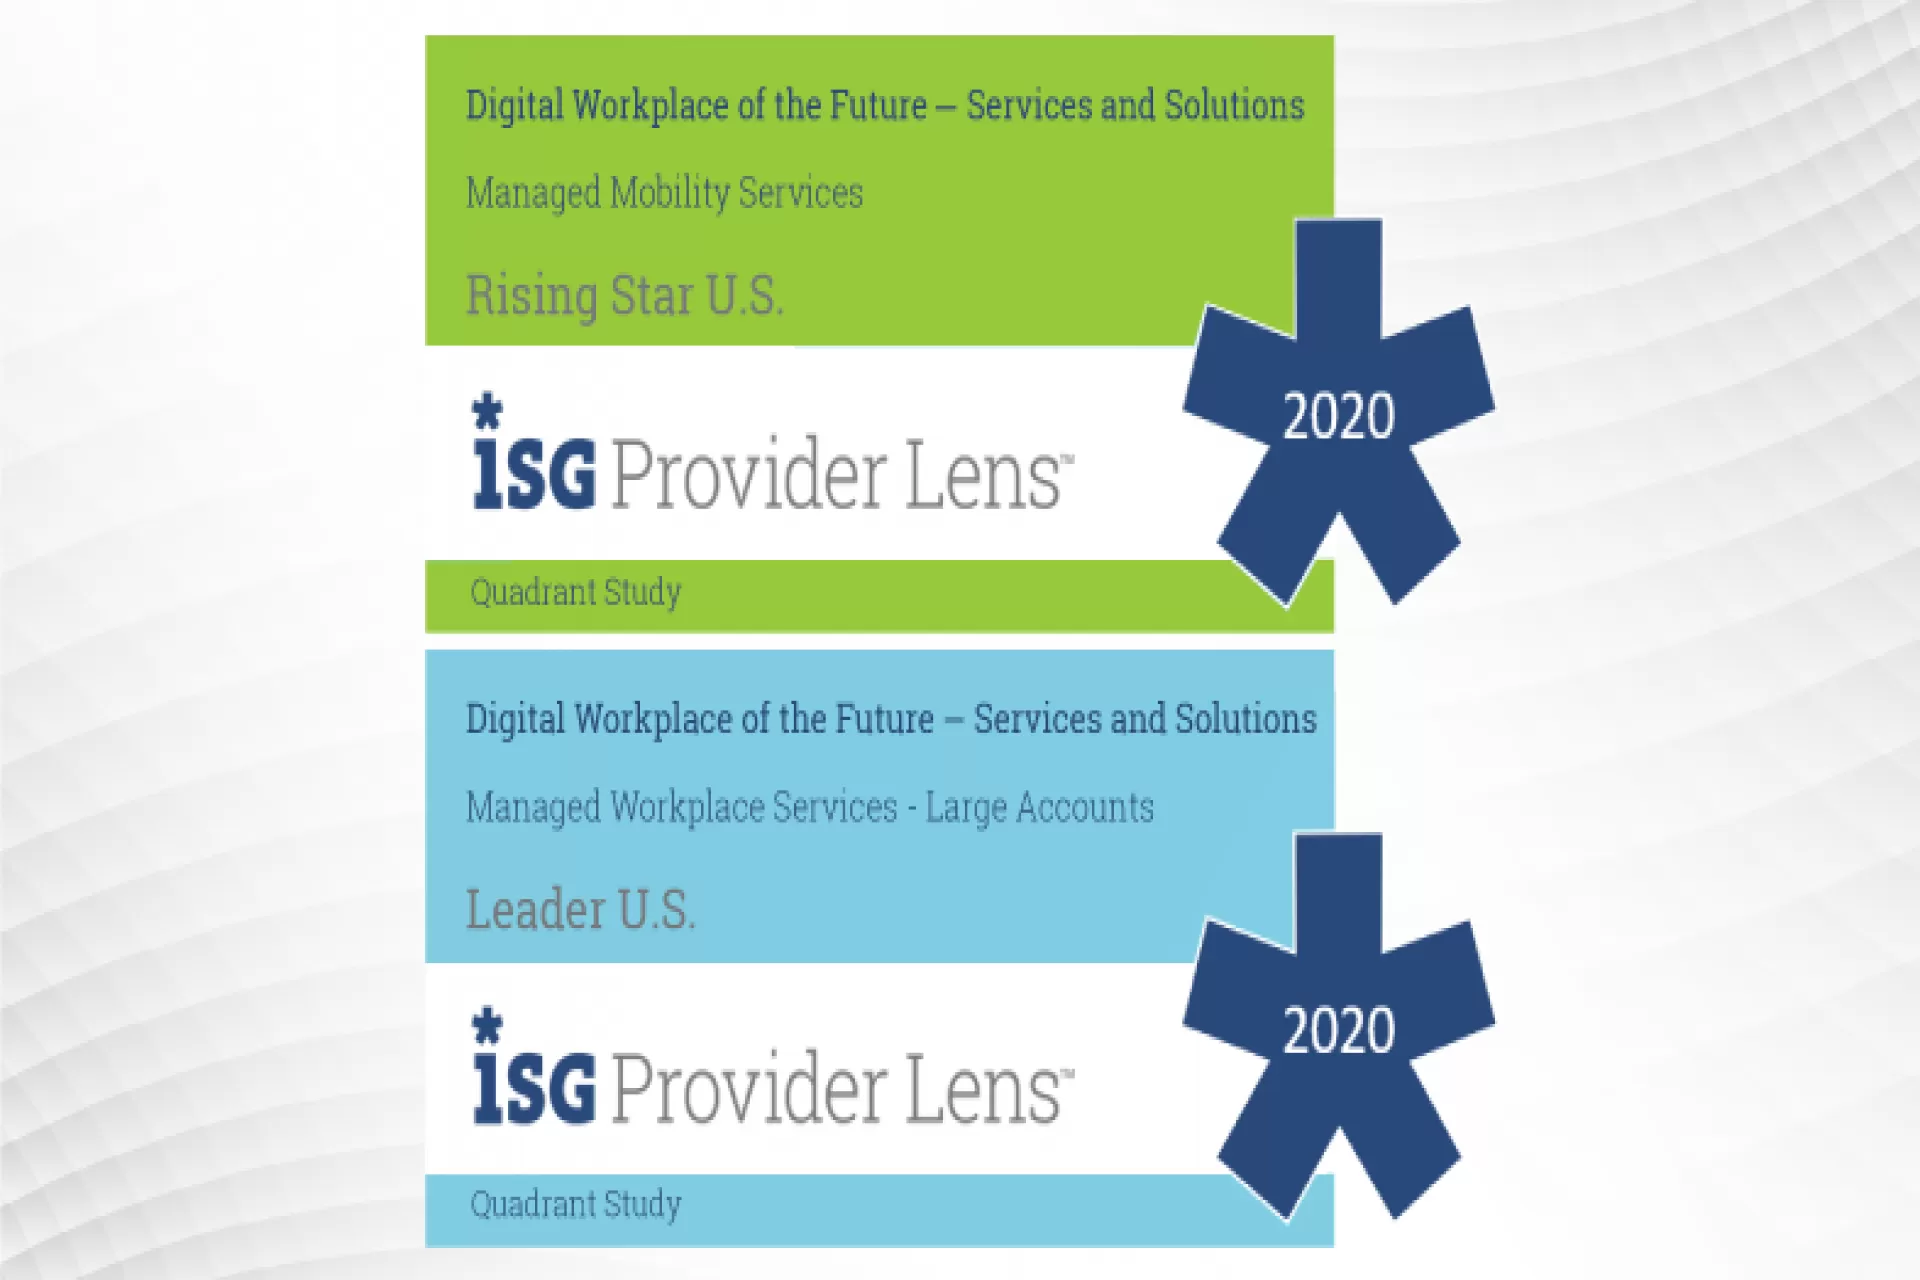 Zensar mentioned in ISG Provider Lens™ Quadrant Report as Rising Star in Managed Mobility Services and Leader in Managed Workplace Services - Large Accounts in Digital Workplace of the Future- Services and Solutions U.S. 2020